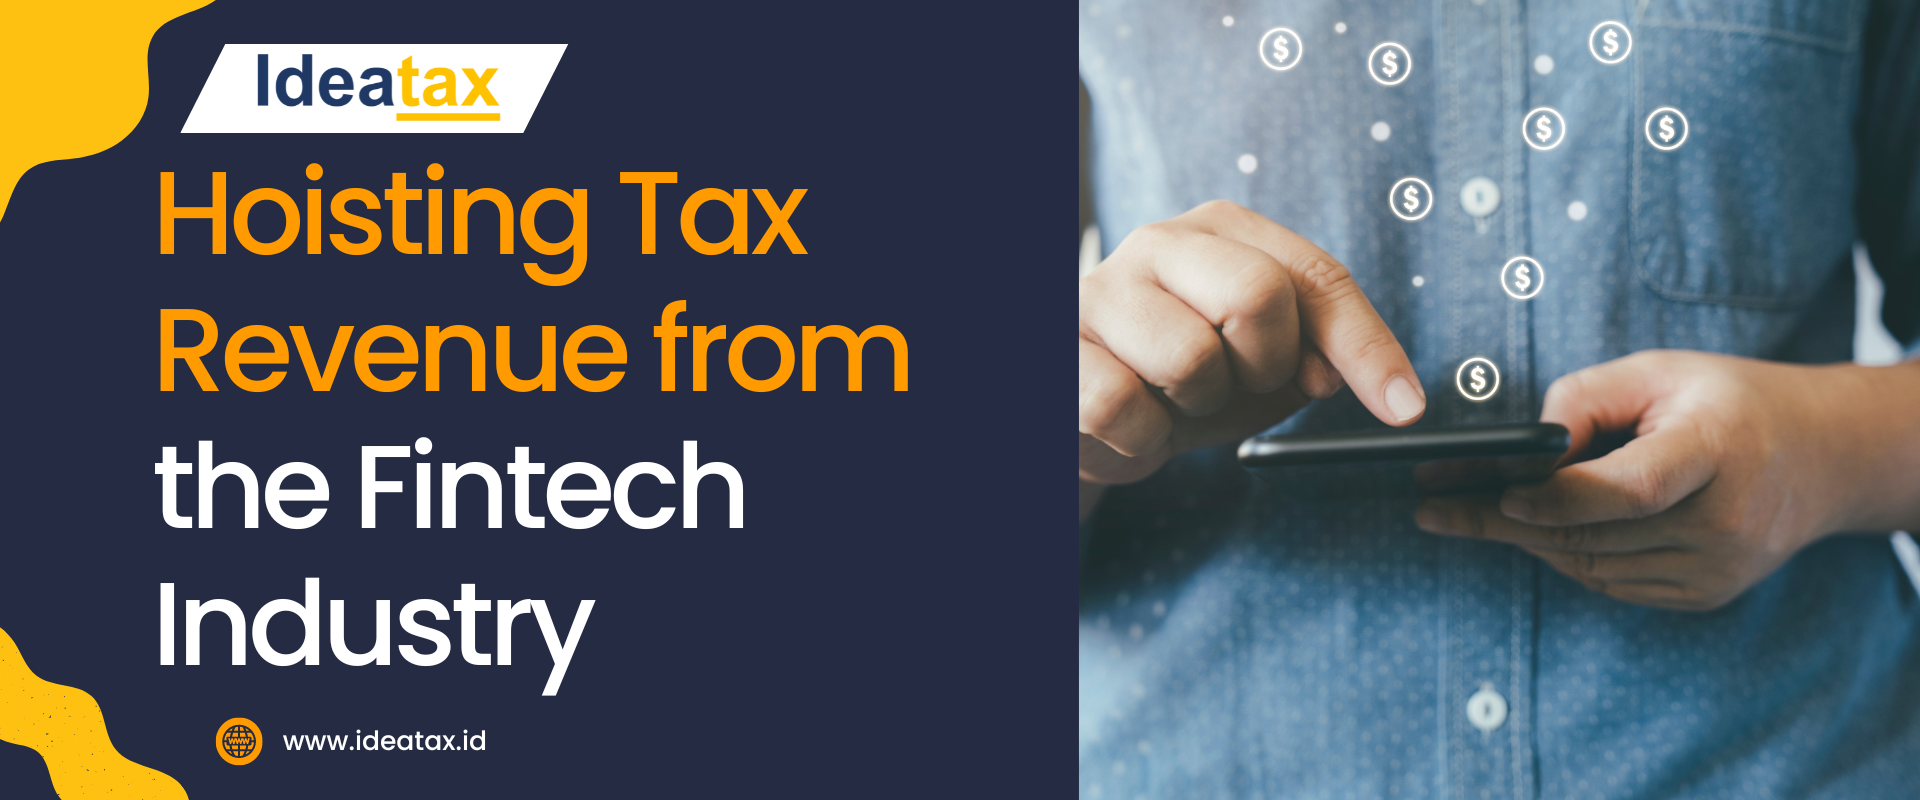 Hoisting Tax Revenue from the Fintech Industry